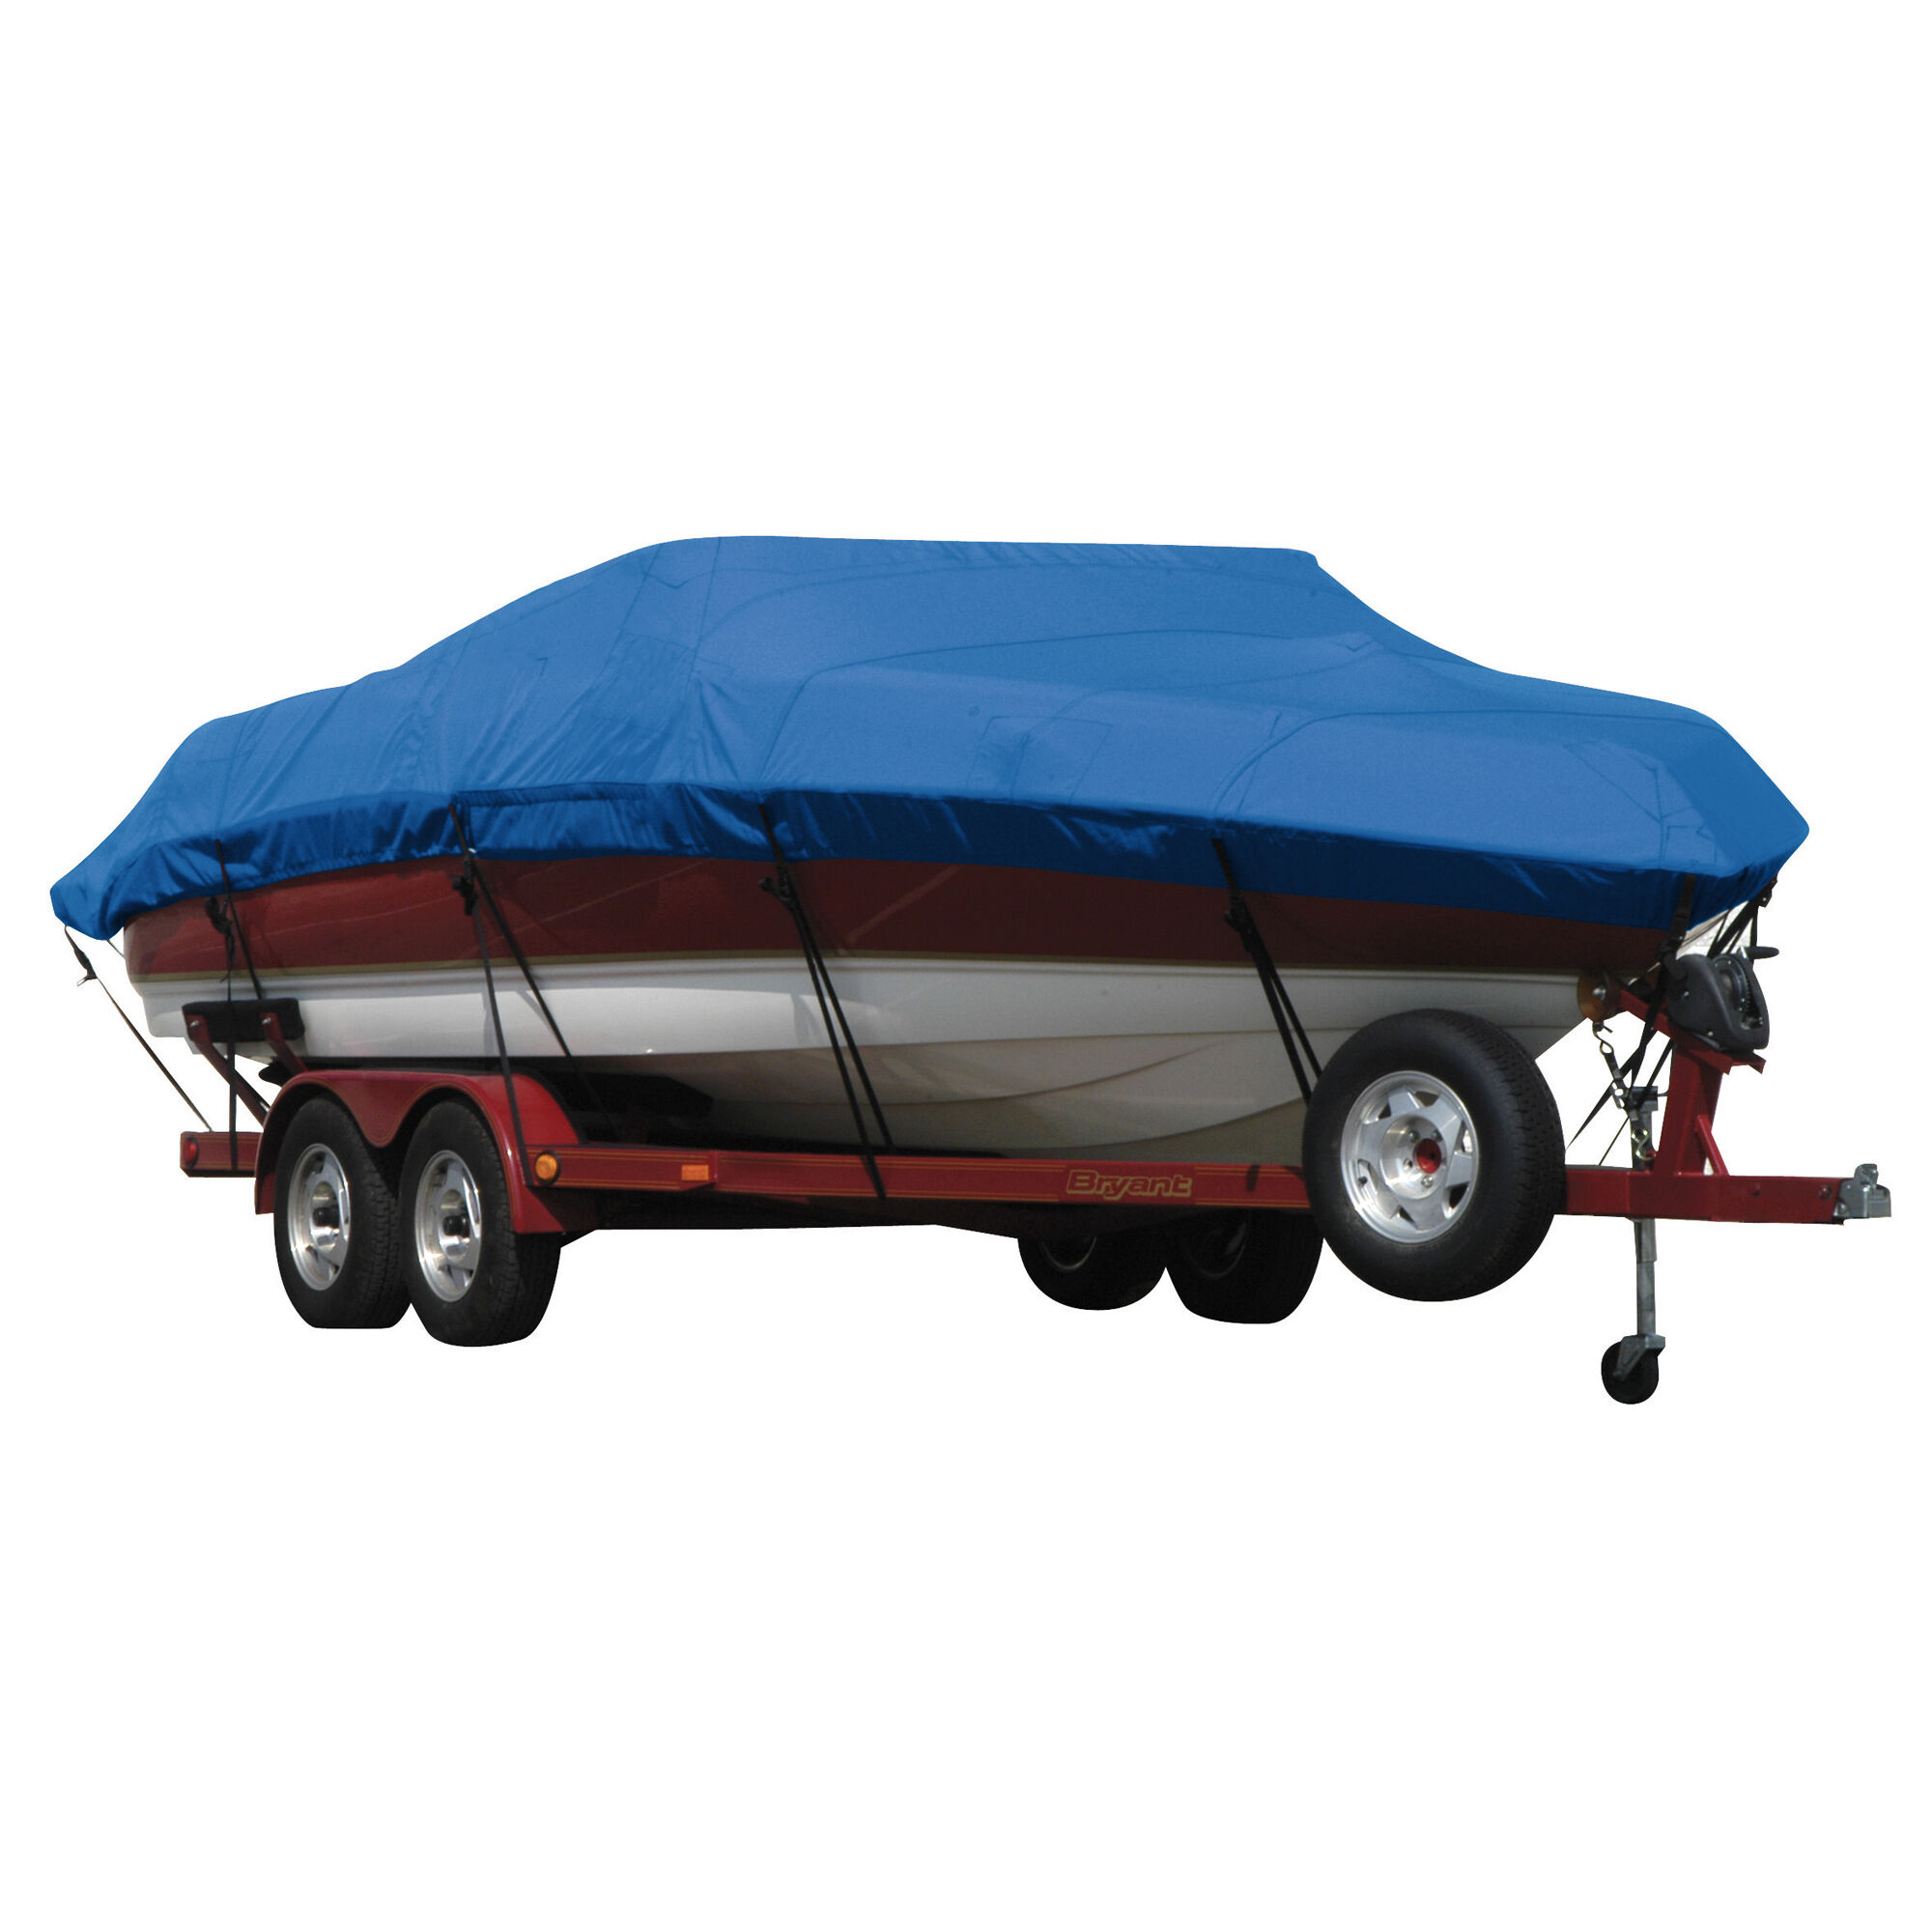 Covermate Exact Fit Sunbrella Boat Cover for Tahoe 215 215 Deck Boat w/ Port Motor Guide Trolling Motor O/B. Pacific Blue